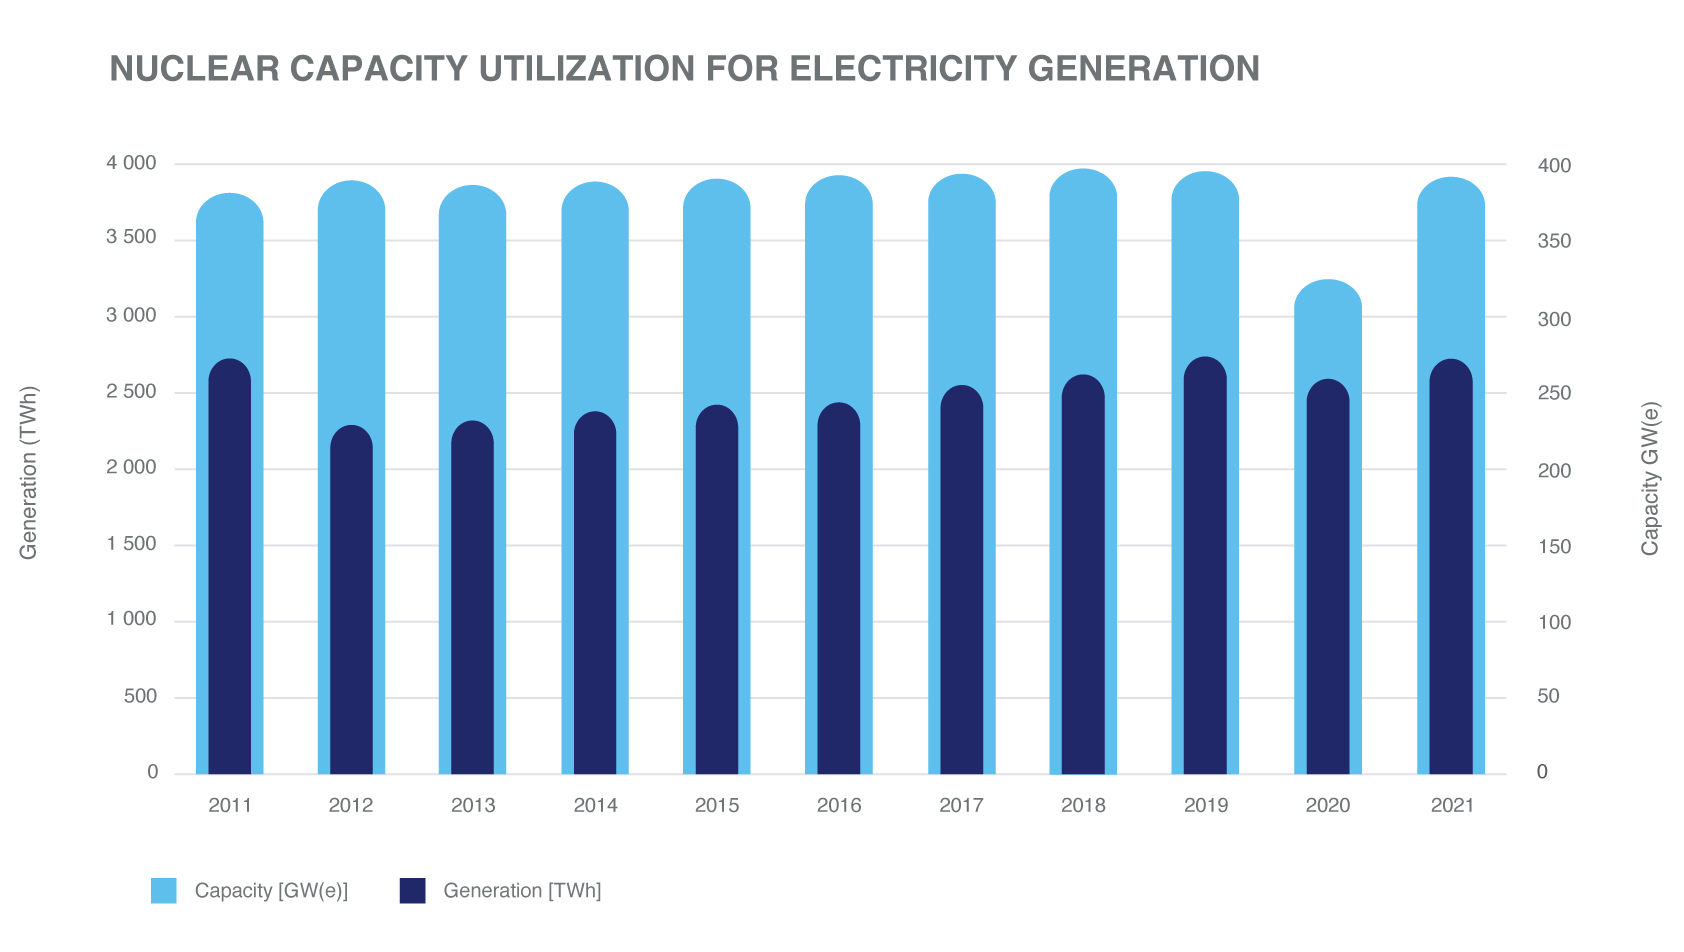 Amid Global Nuclear Power Provides Energy Security with Increased Electricity Generation in 2021 | IAEA